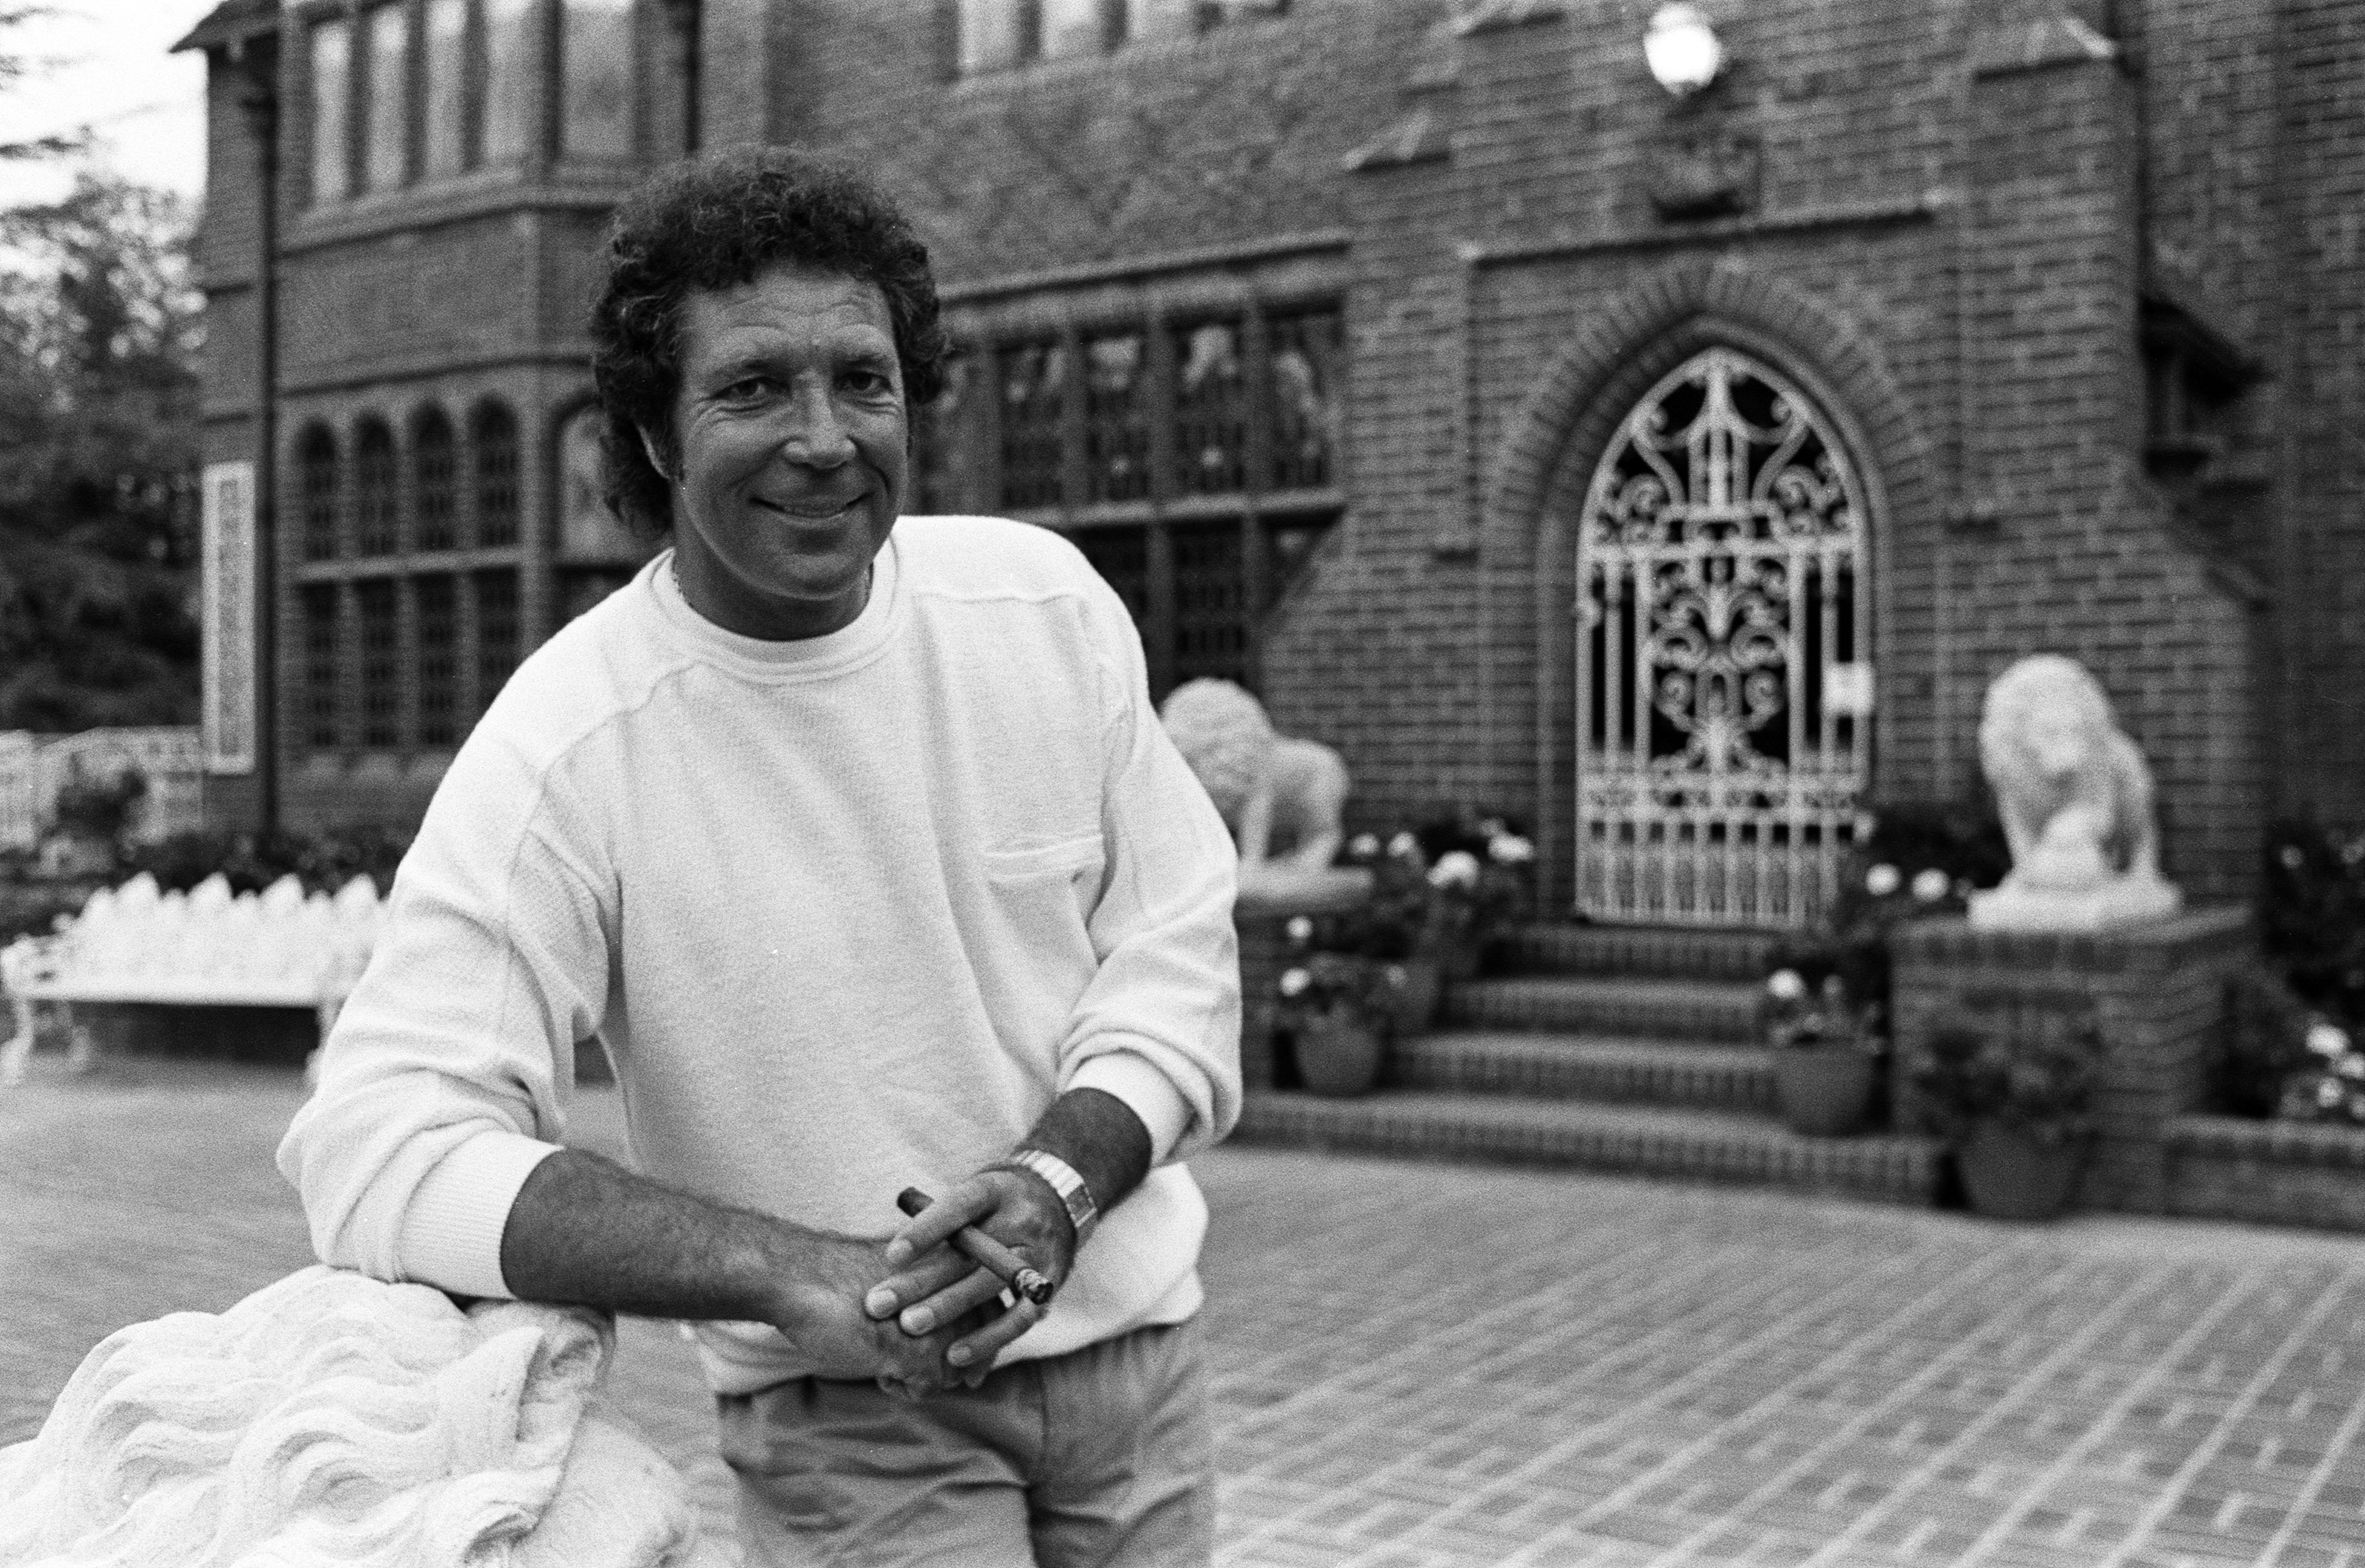 Tom Jones posing in front of his Bel Air home | Source: Getty Images